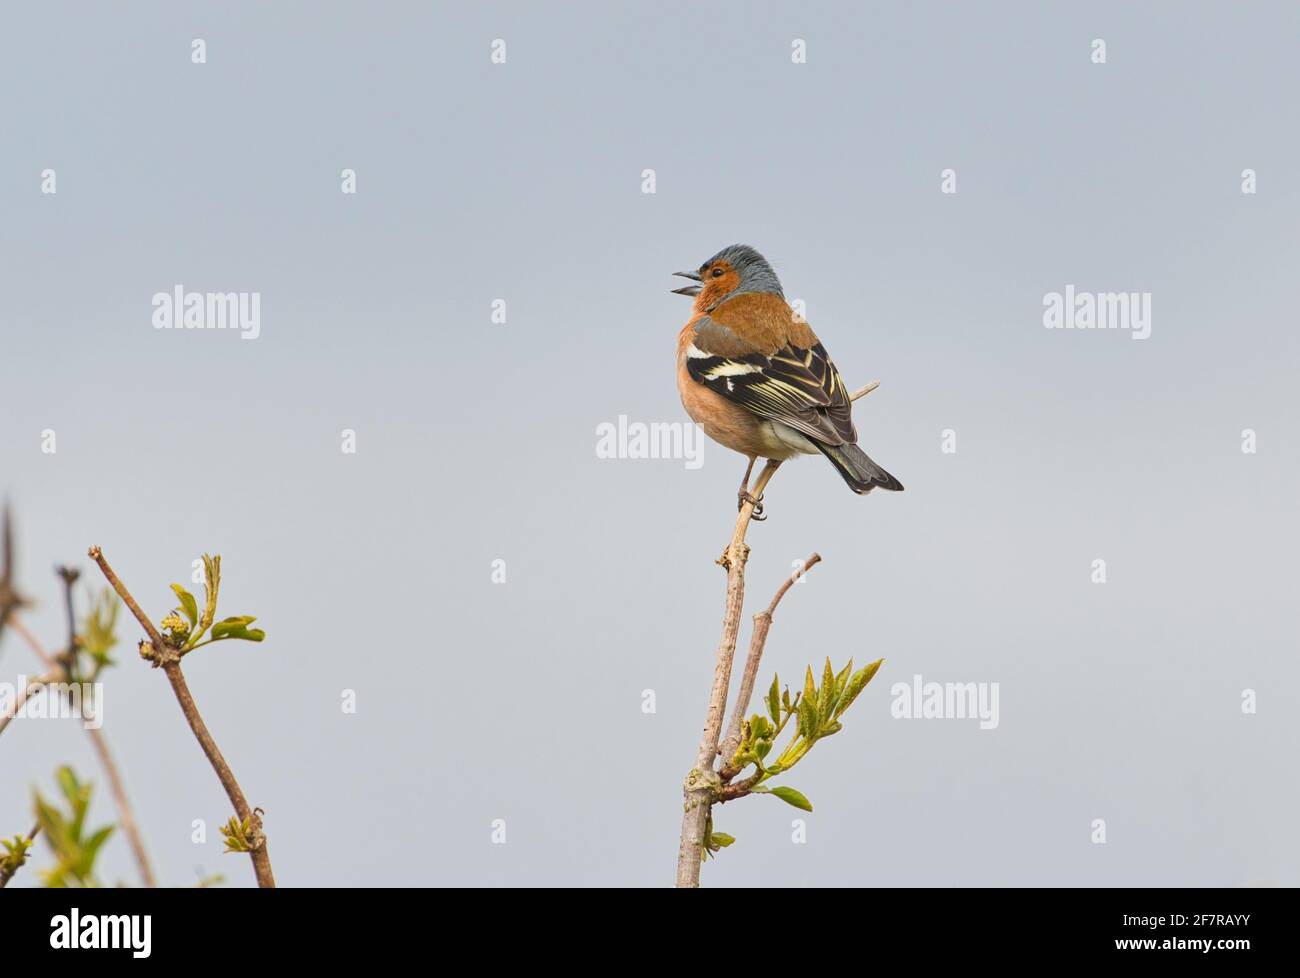 Male chaffinch (Fringilla coelebs) singing to proclaim territory in early spring Stock Photo